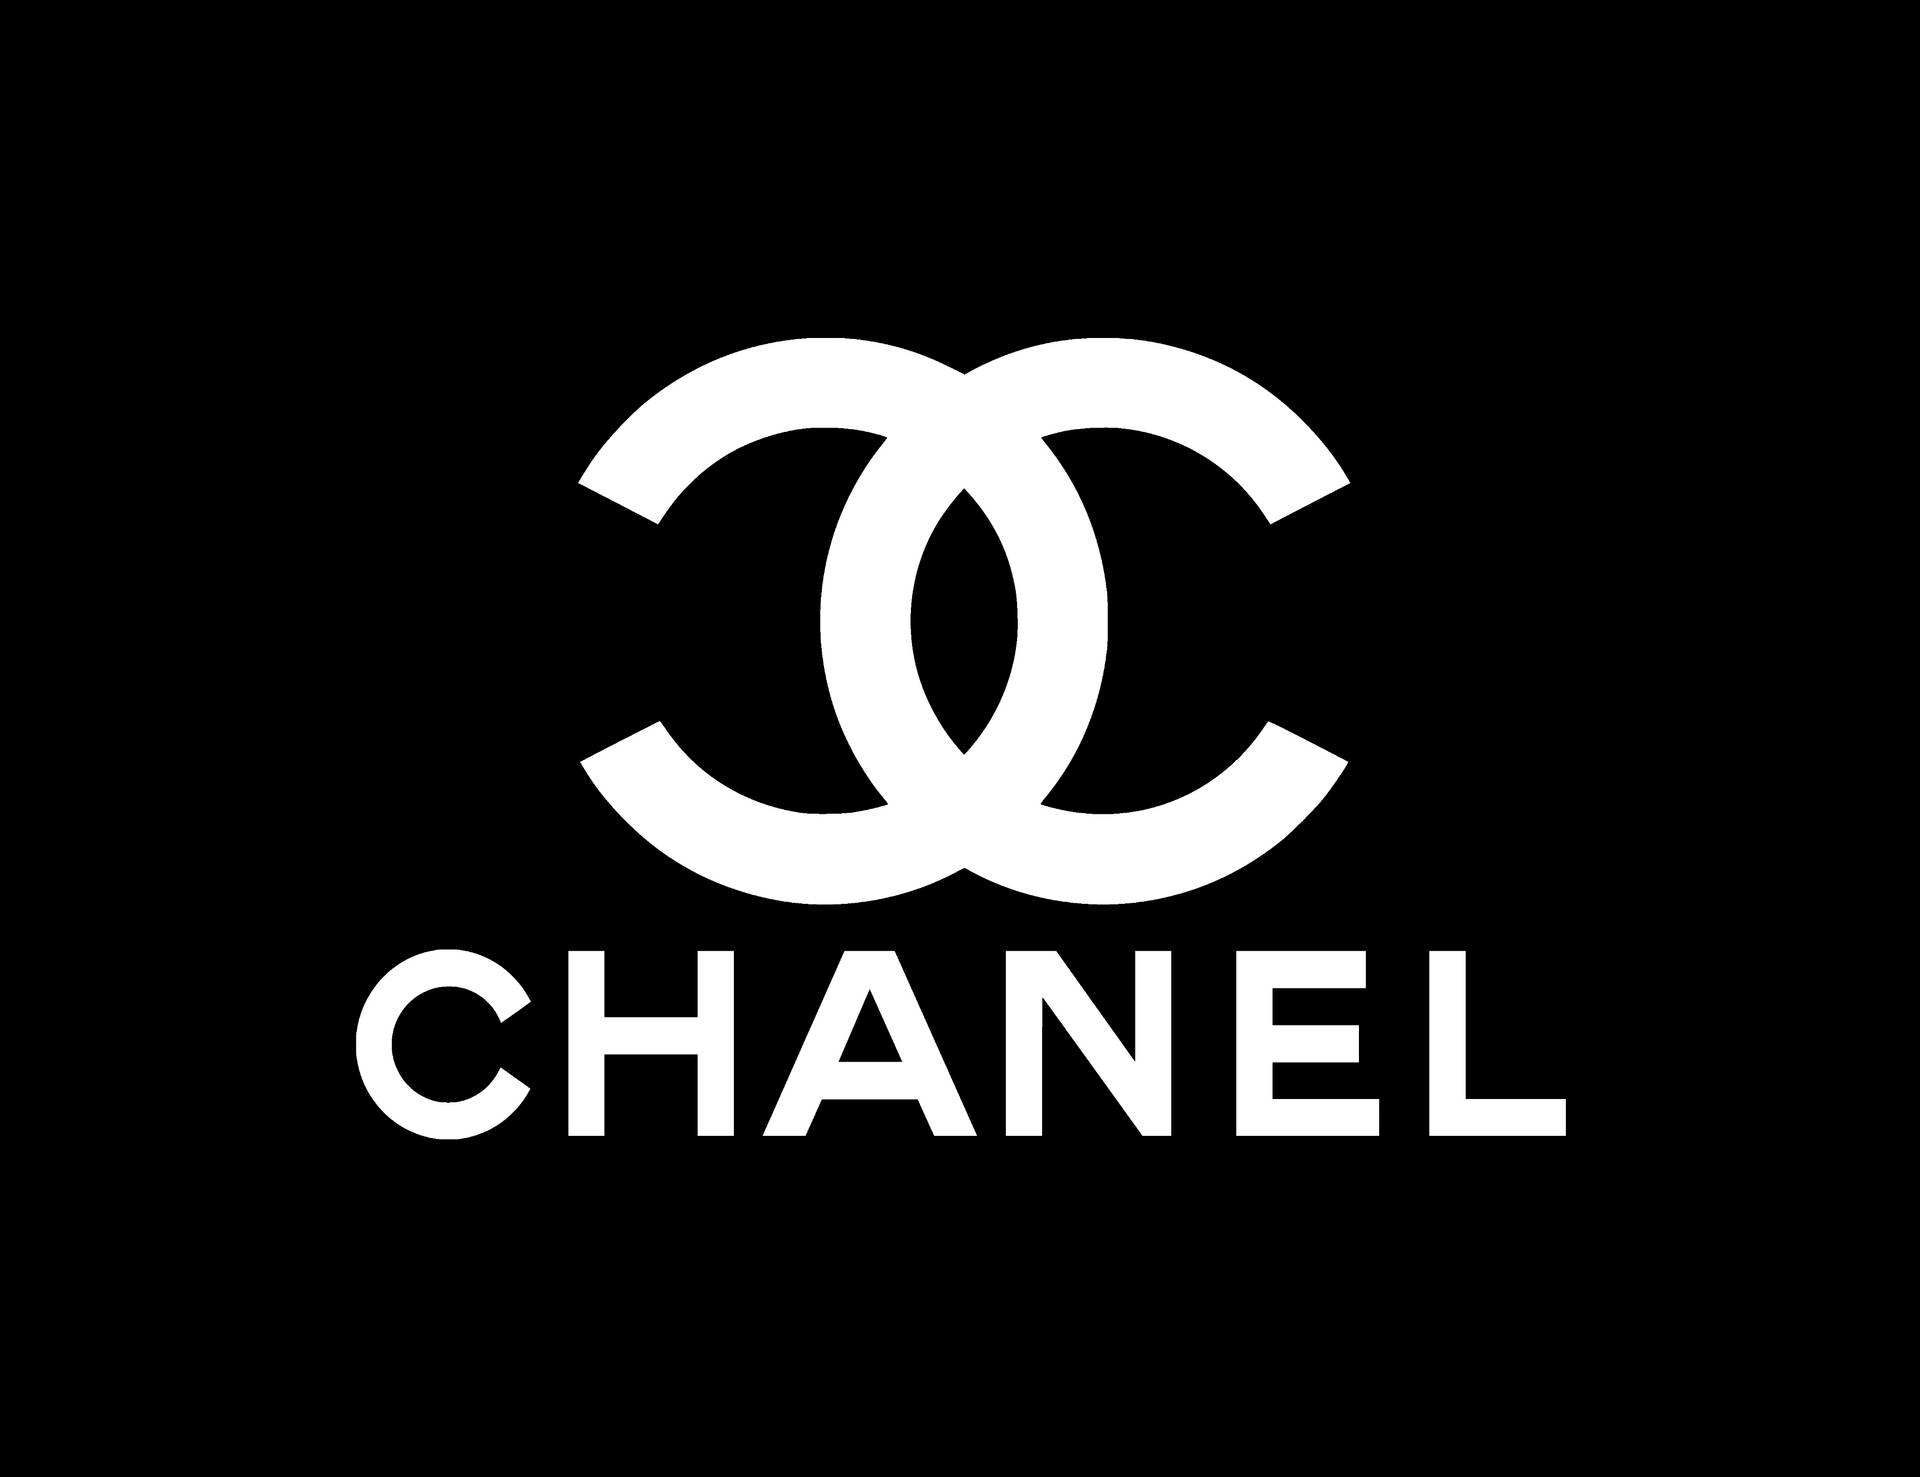 Be Bold, Be Unique, Be yourself with CHANEL Wallpaper